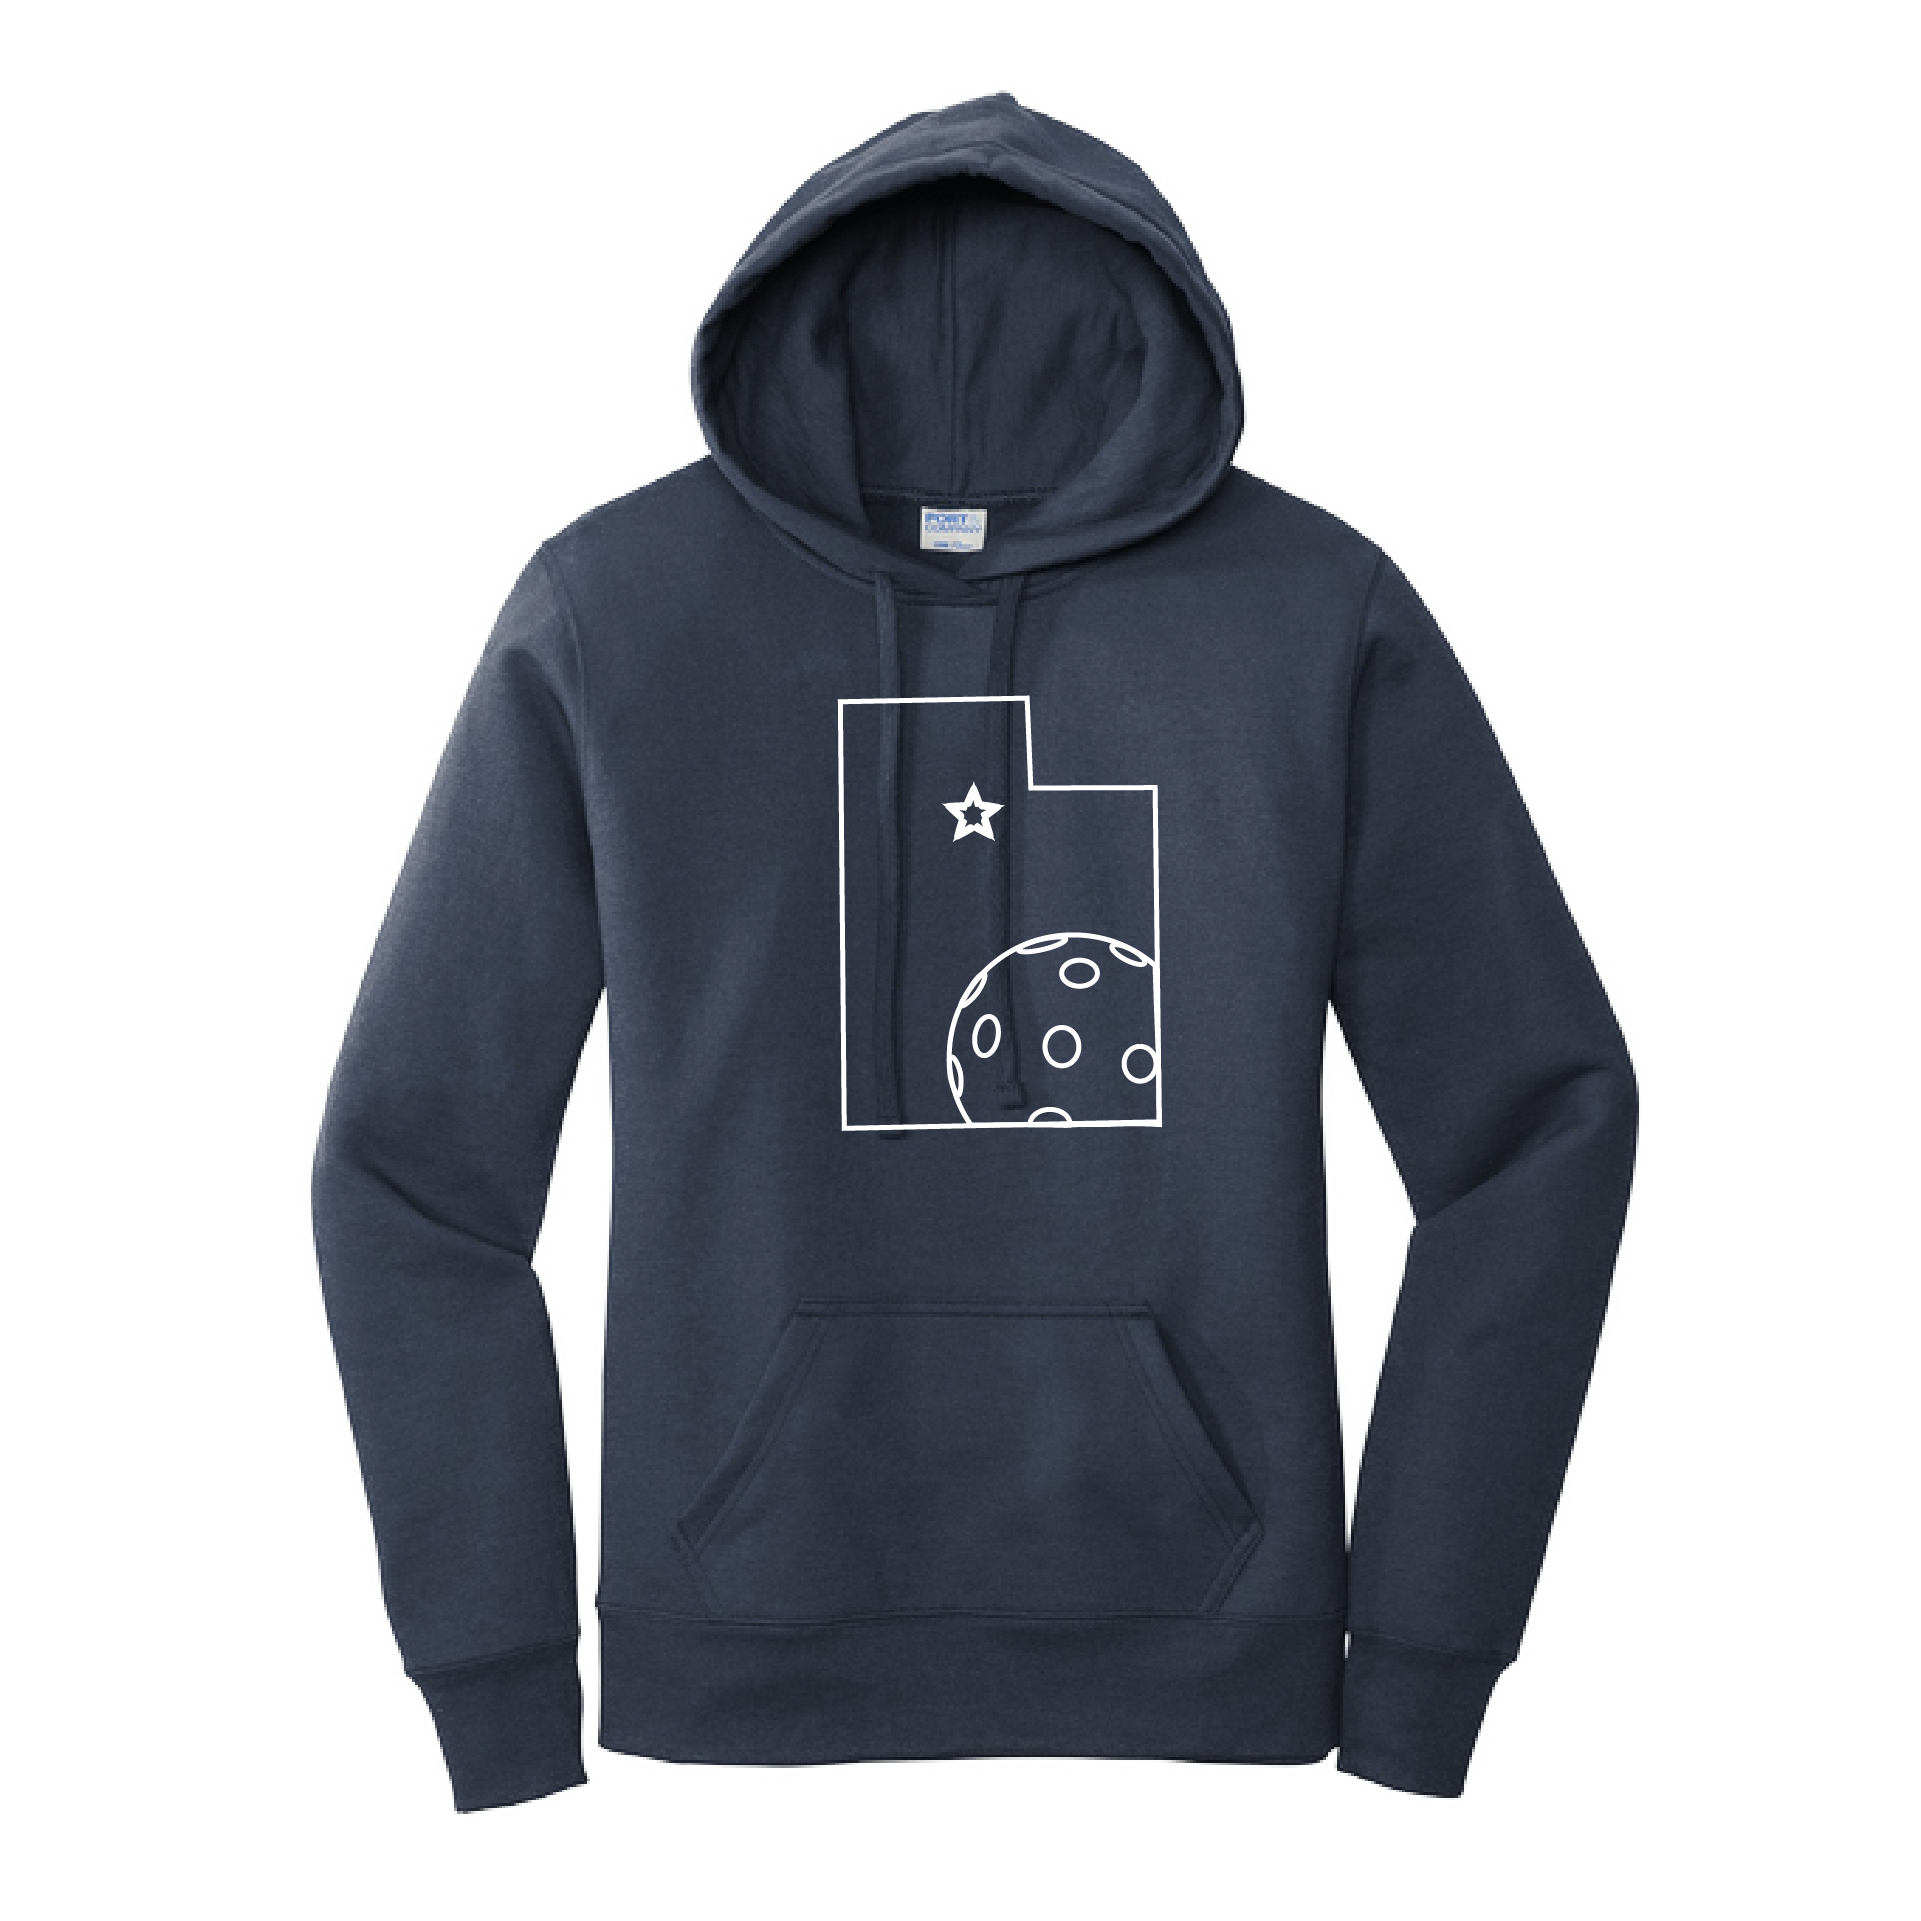 Pickleball Design: Utah Pickleball  Women's Hooded pullover Sweatshirt  Turn up the volume in this Women's Sweatshirts with its perfect mix of softness and attitude. Ultra soft lined inside with a lined hood also. This is fitted nicely for a women's figure. Front pouch pocket.